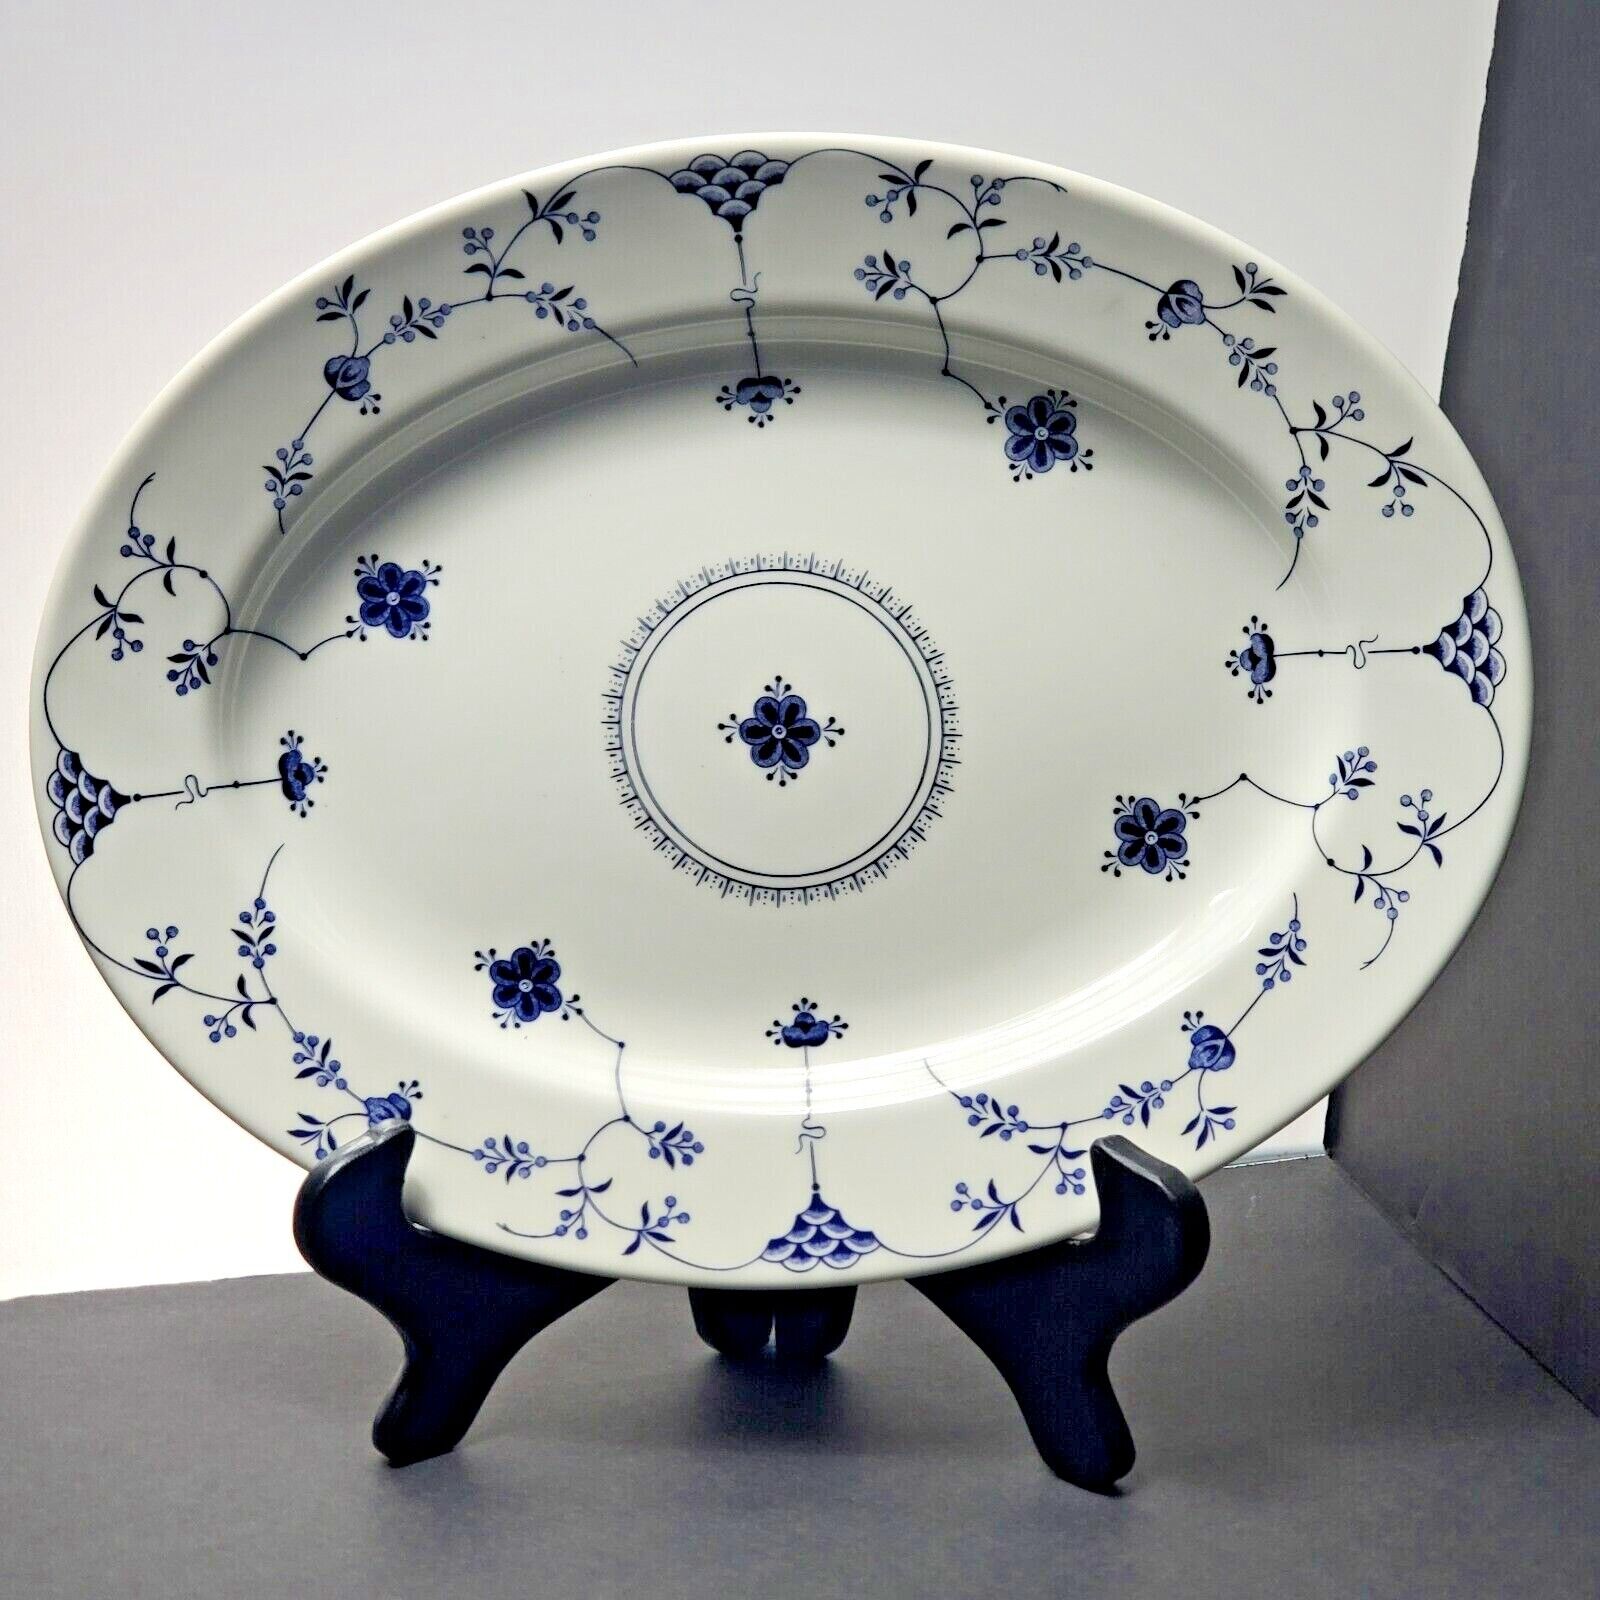 Churchill Finlandia Oval Serving Plate Blue White Floral Smooth Rim Family Meal